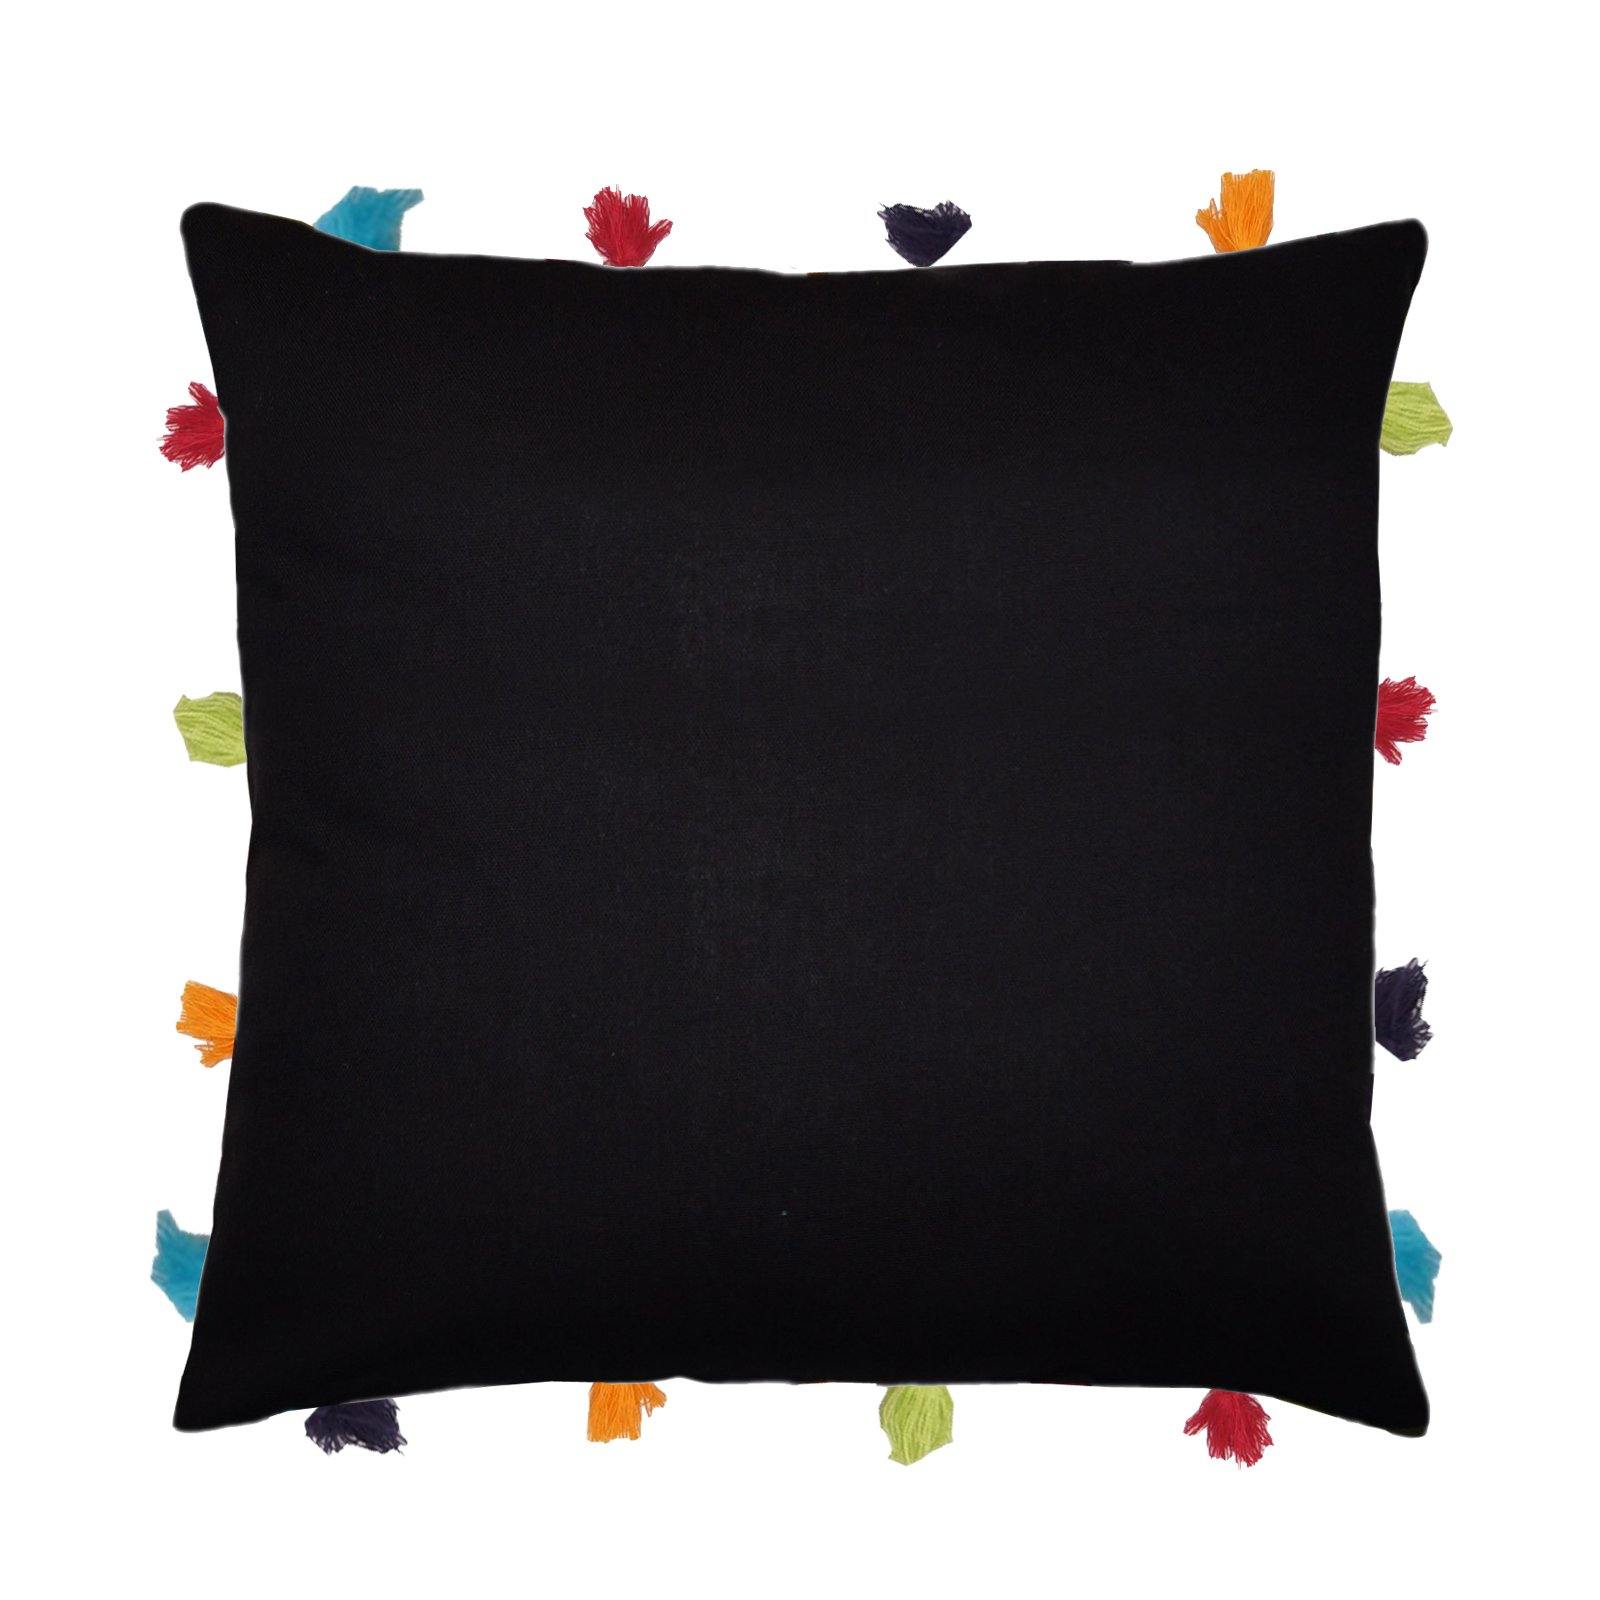 Lushomes Pirate Black Cushion Cover with Colorful tassels (Single pc, 14 x 14”) - Lushomes